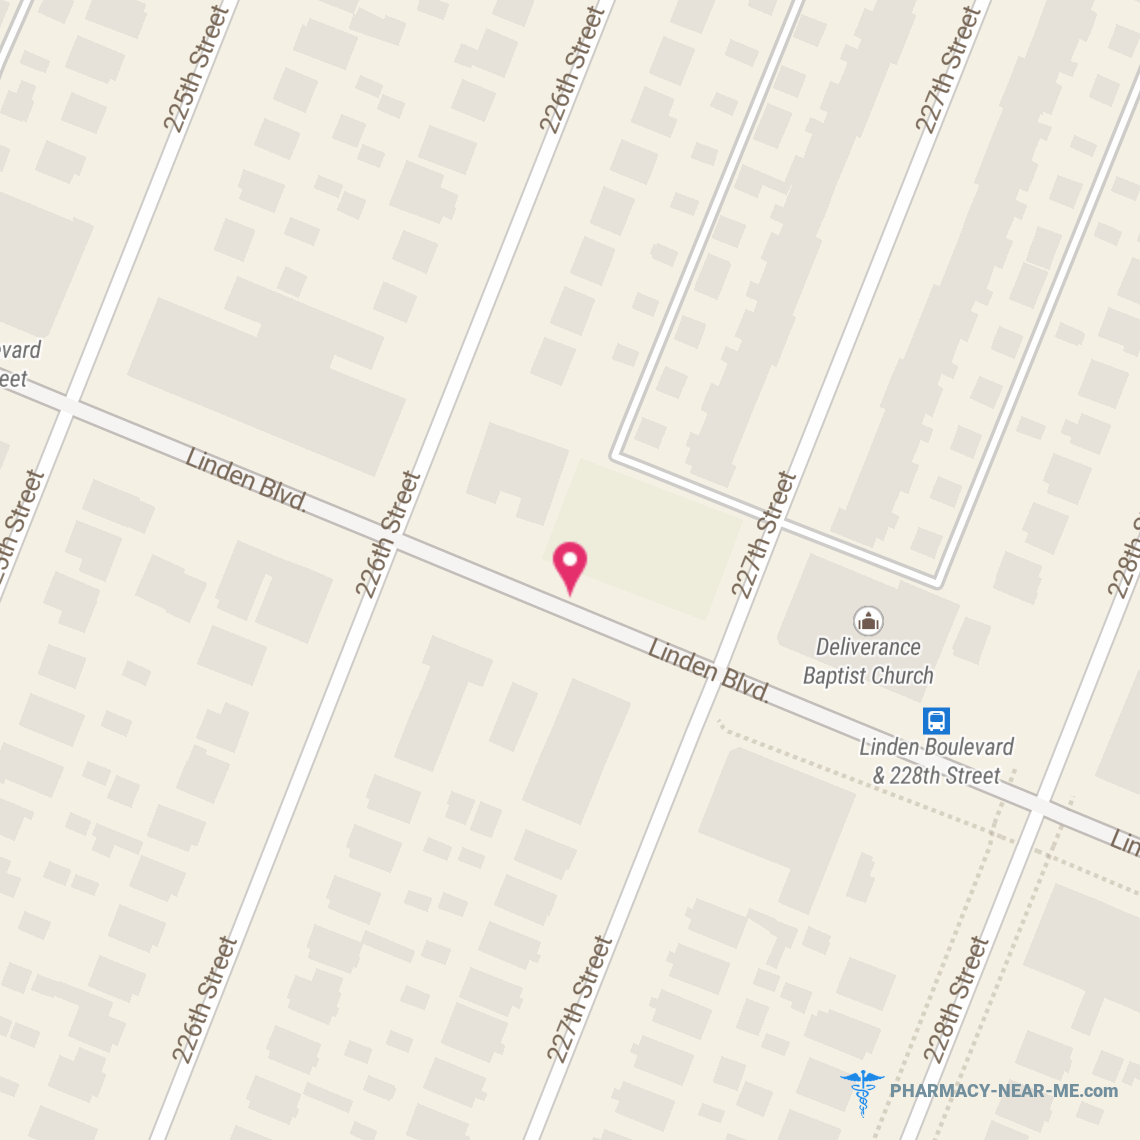 RLNTS INC - Pharmacy Hours, Phone, Reviews & Information: 224-04 Linden Boulevard, Queens, New York 11411, United States